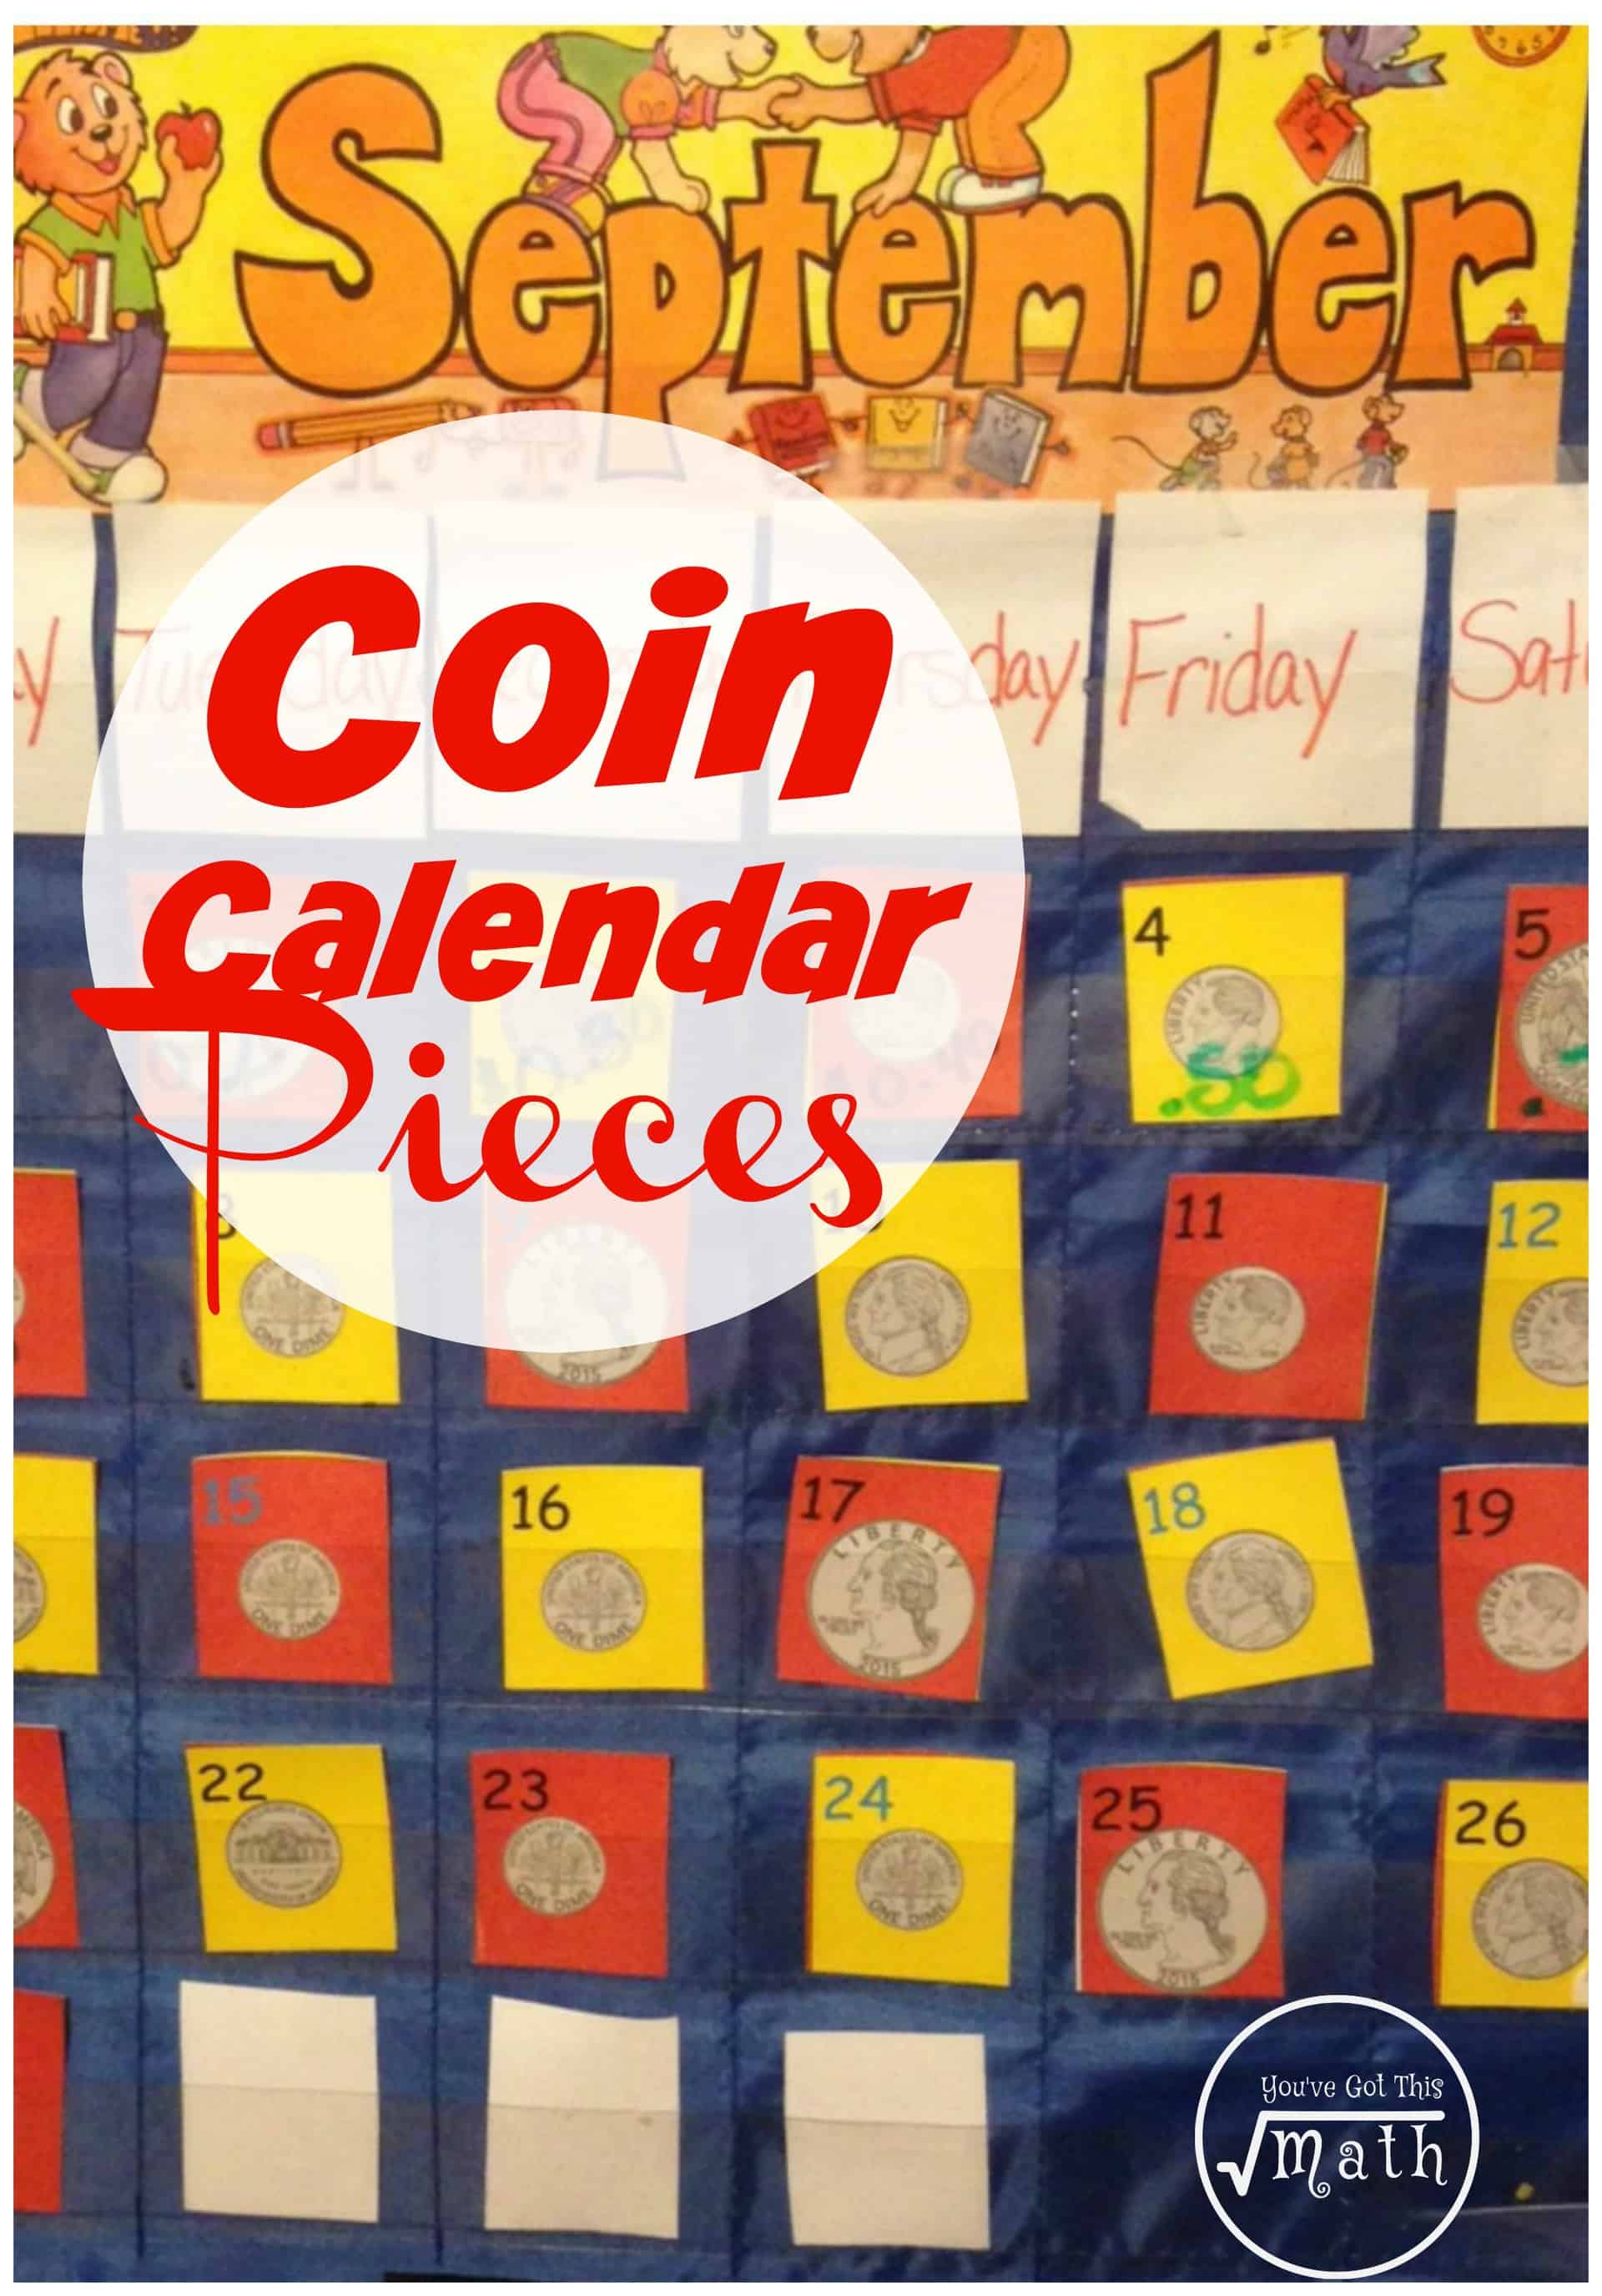 Work on coin identification, counting money, and patterns with these colorful calendar pieces for elementary students in first and second grade.